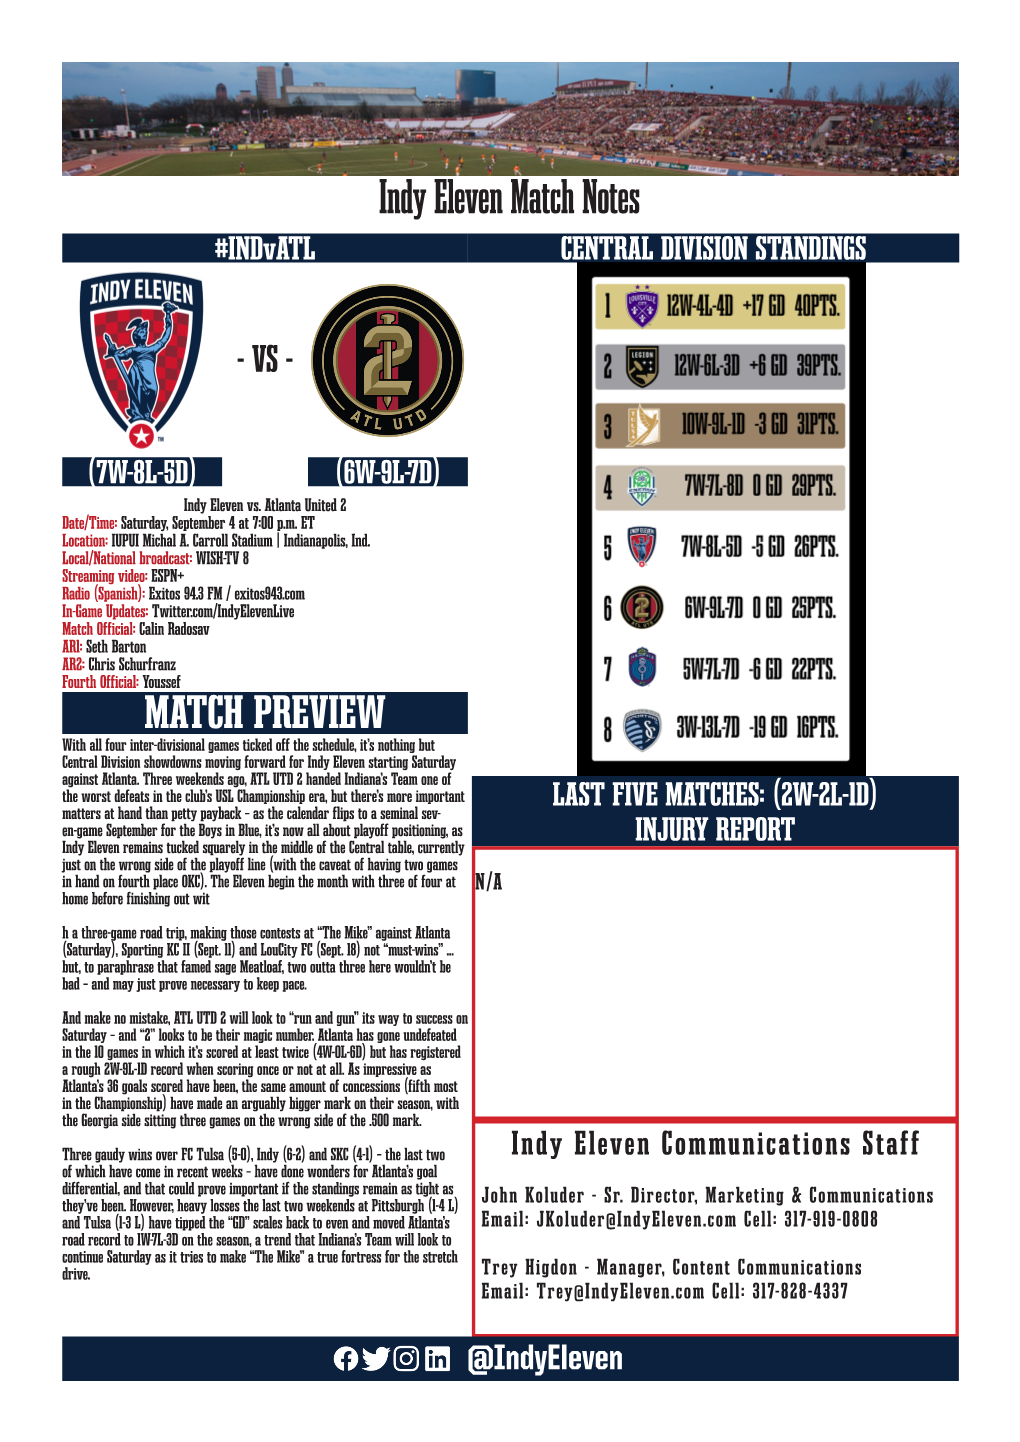 Indy Eleven Match Notes #Indvatl CENTRAL DIVISION STANDINGS